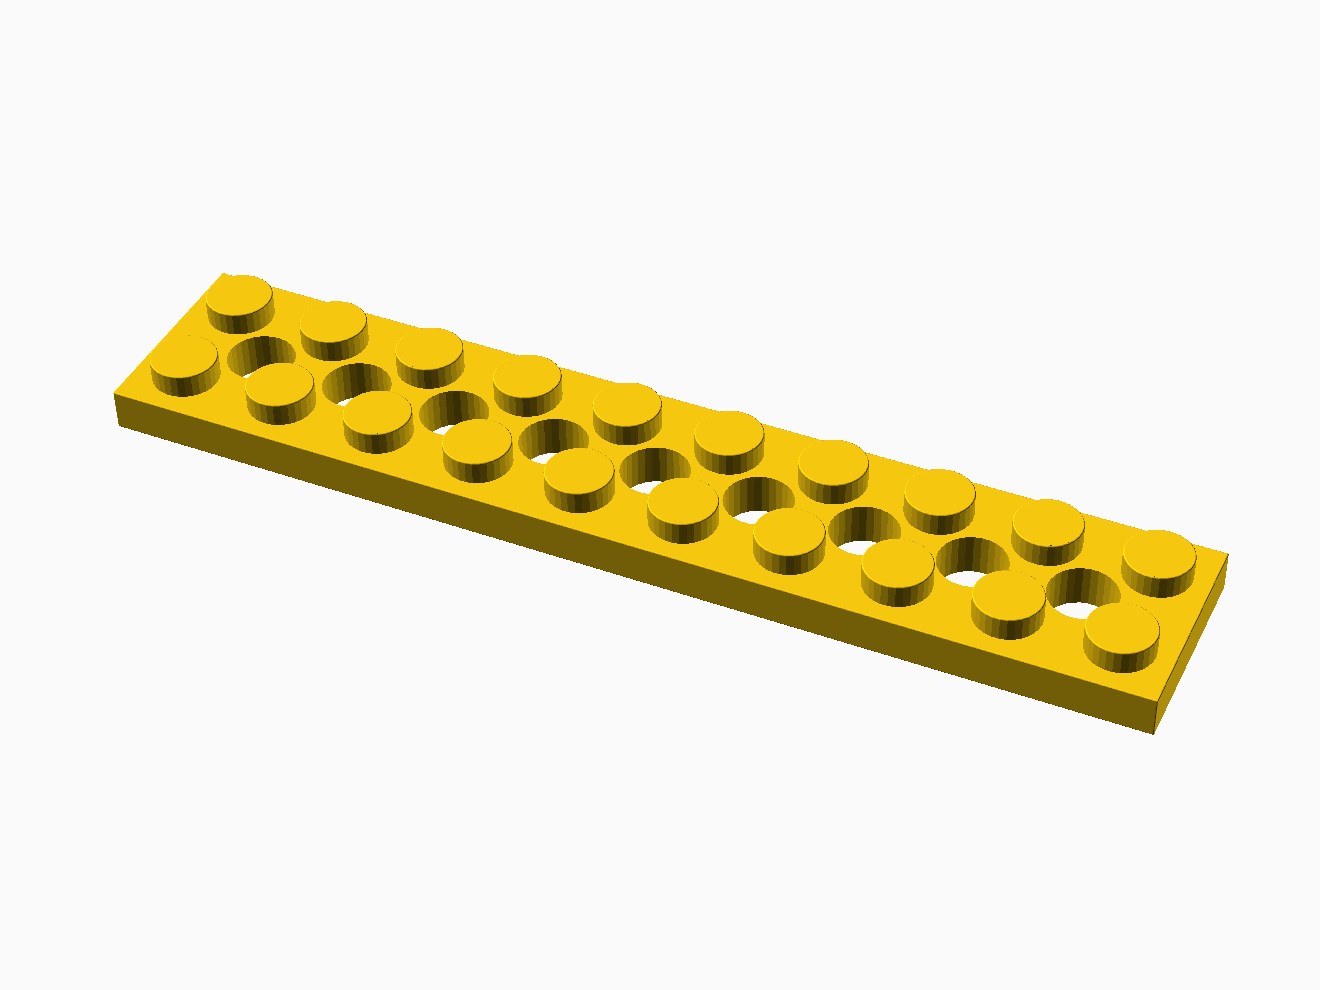 3D printable model of a LEGO Technic 10x2 Plate.